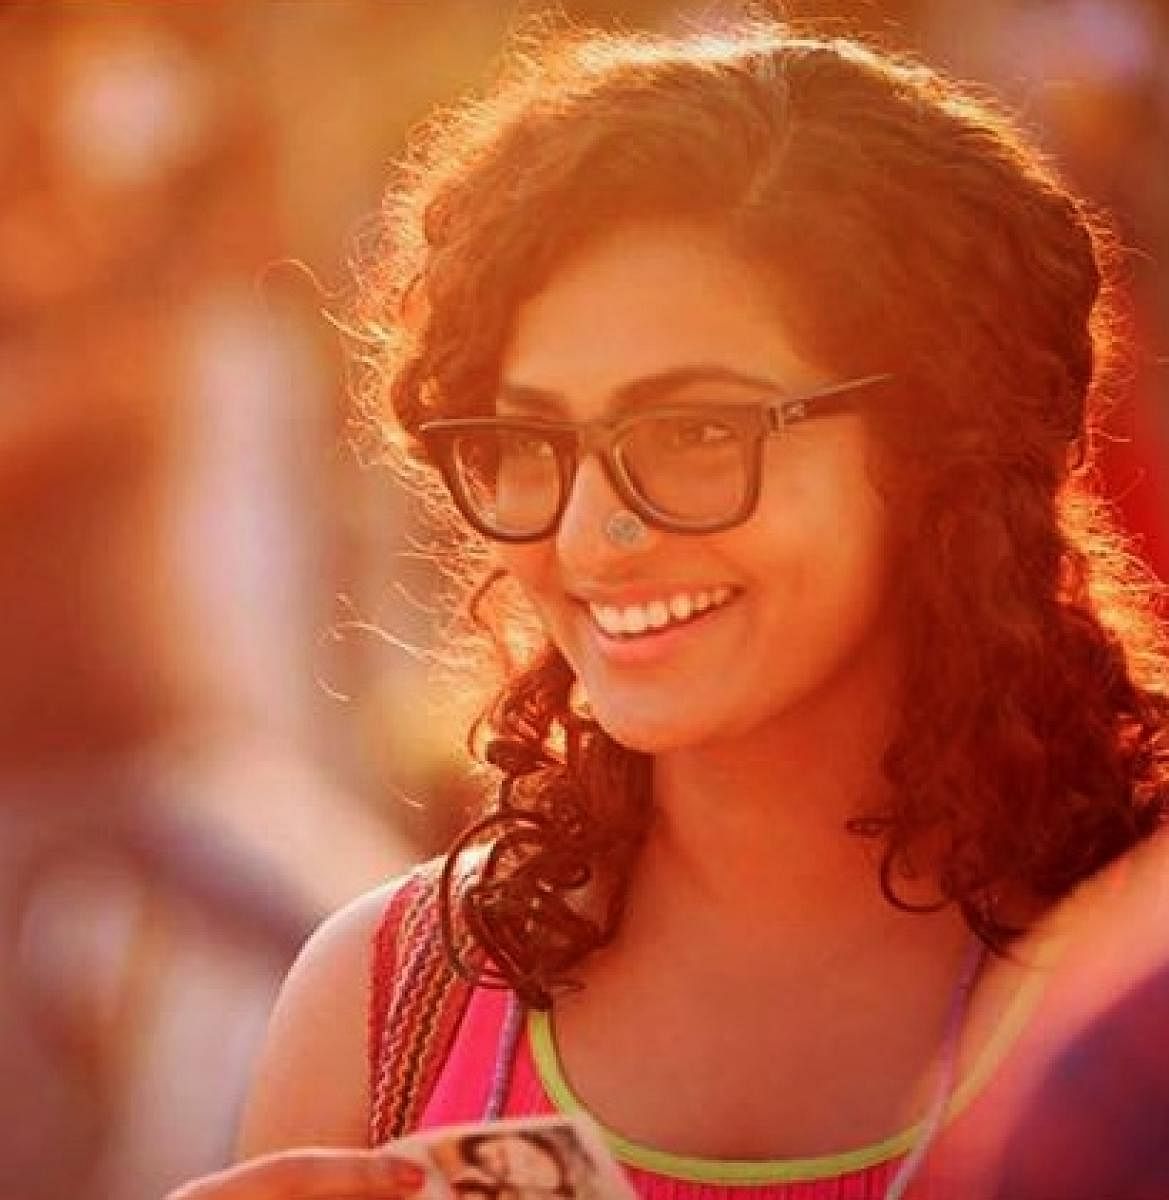 Known for a variety of roles in various languages, including Malayalam, Tamil and Hindi, Parvathy bagged the 'Best Actress' award. She has also secured the Kerala State Film Award for the best actress.